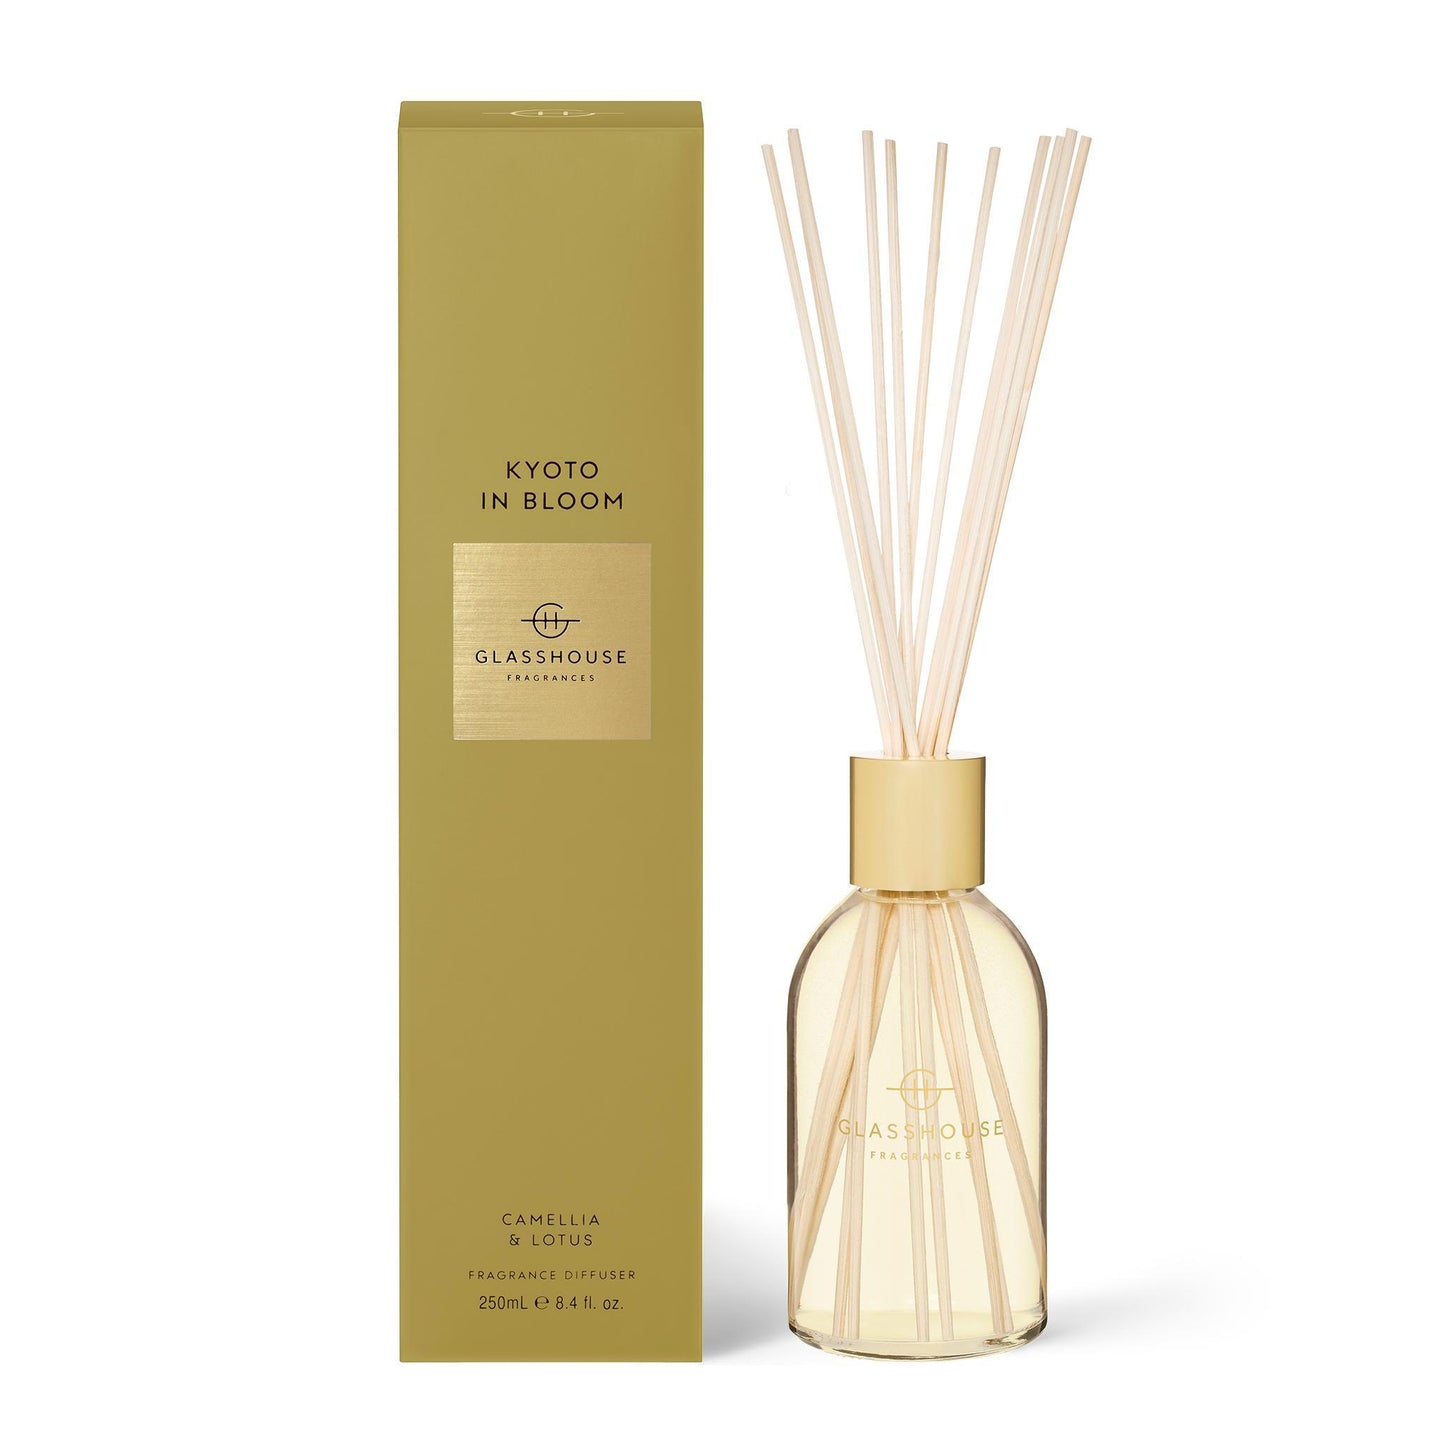 Diffuser 250ml - Kyoto in Bloom - Glasshouse Fragrances - FUDGE Gifts Home Lifestyle